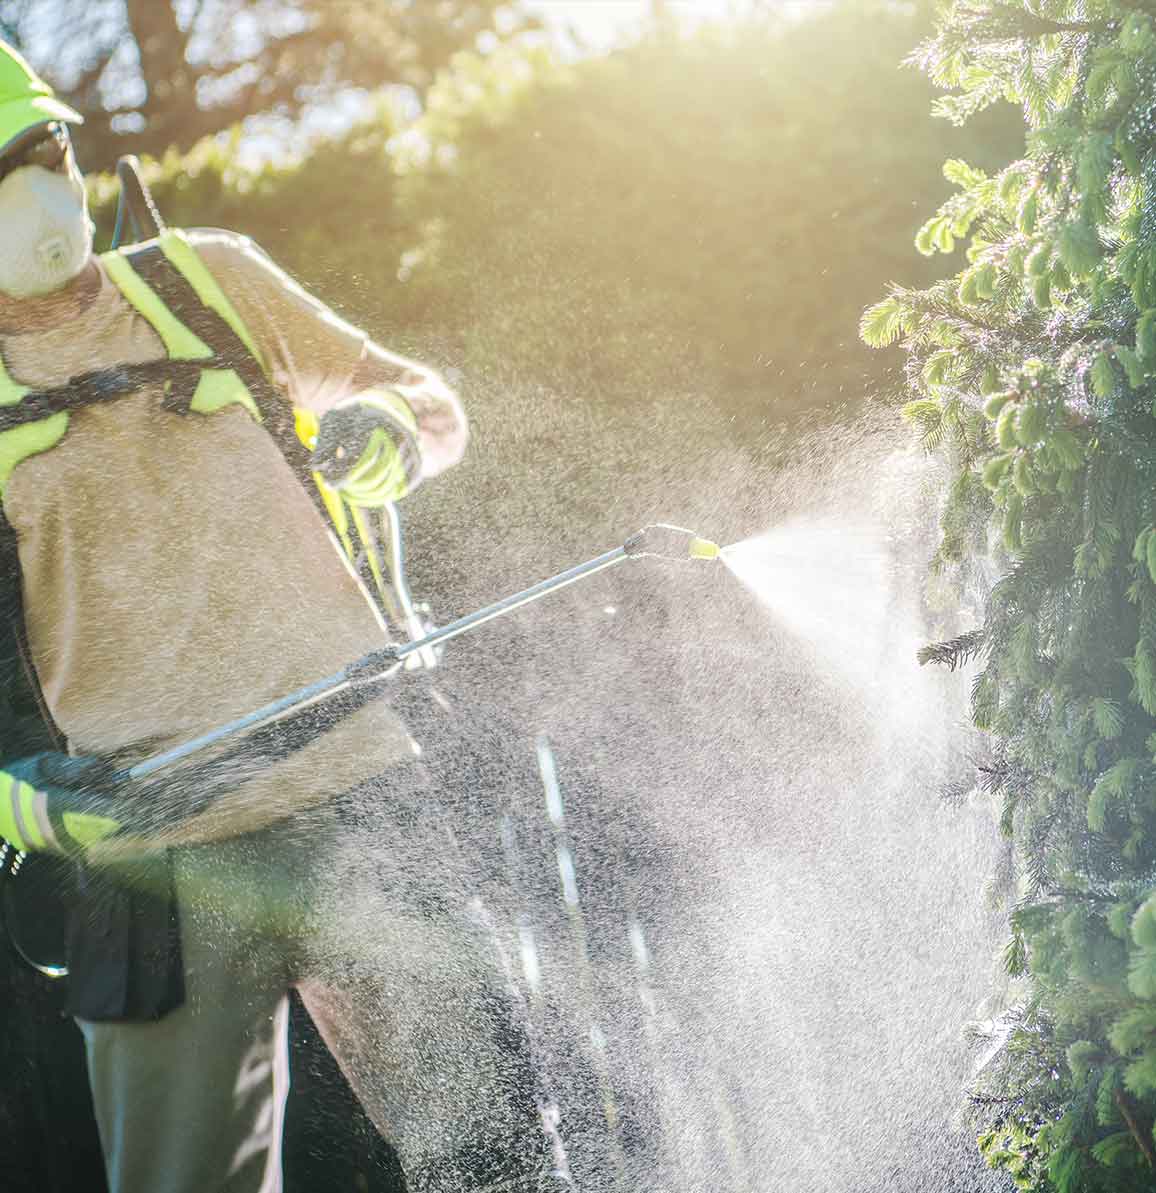 Green group employee spraying mosquito pesticide mist